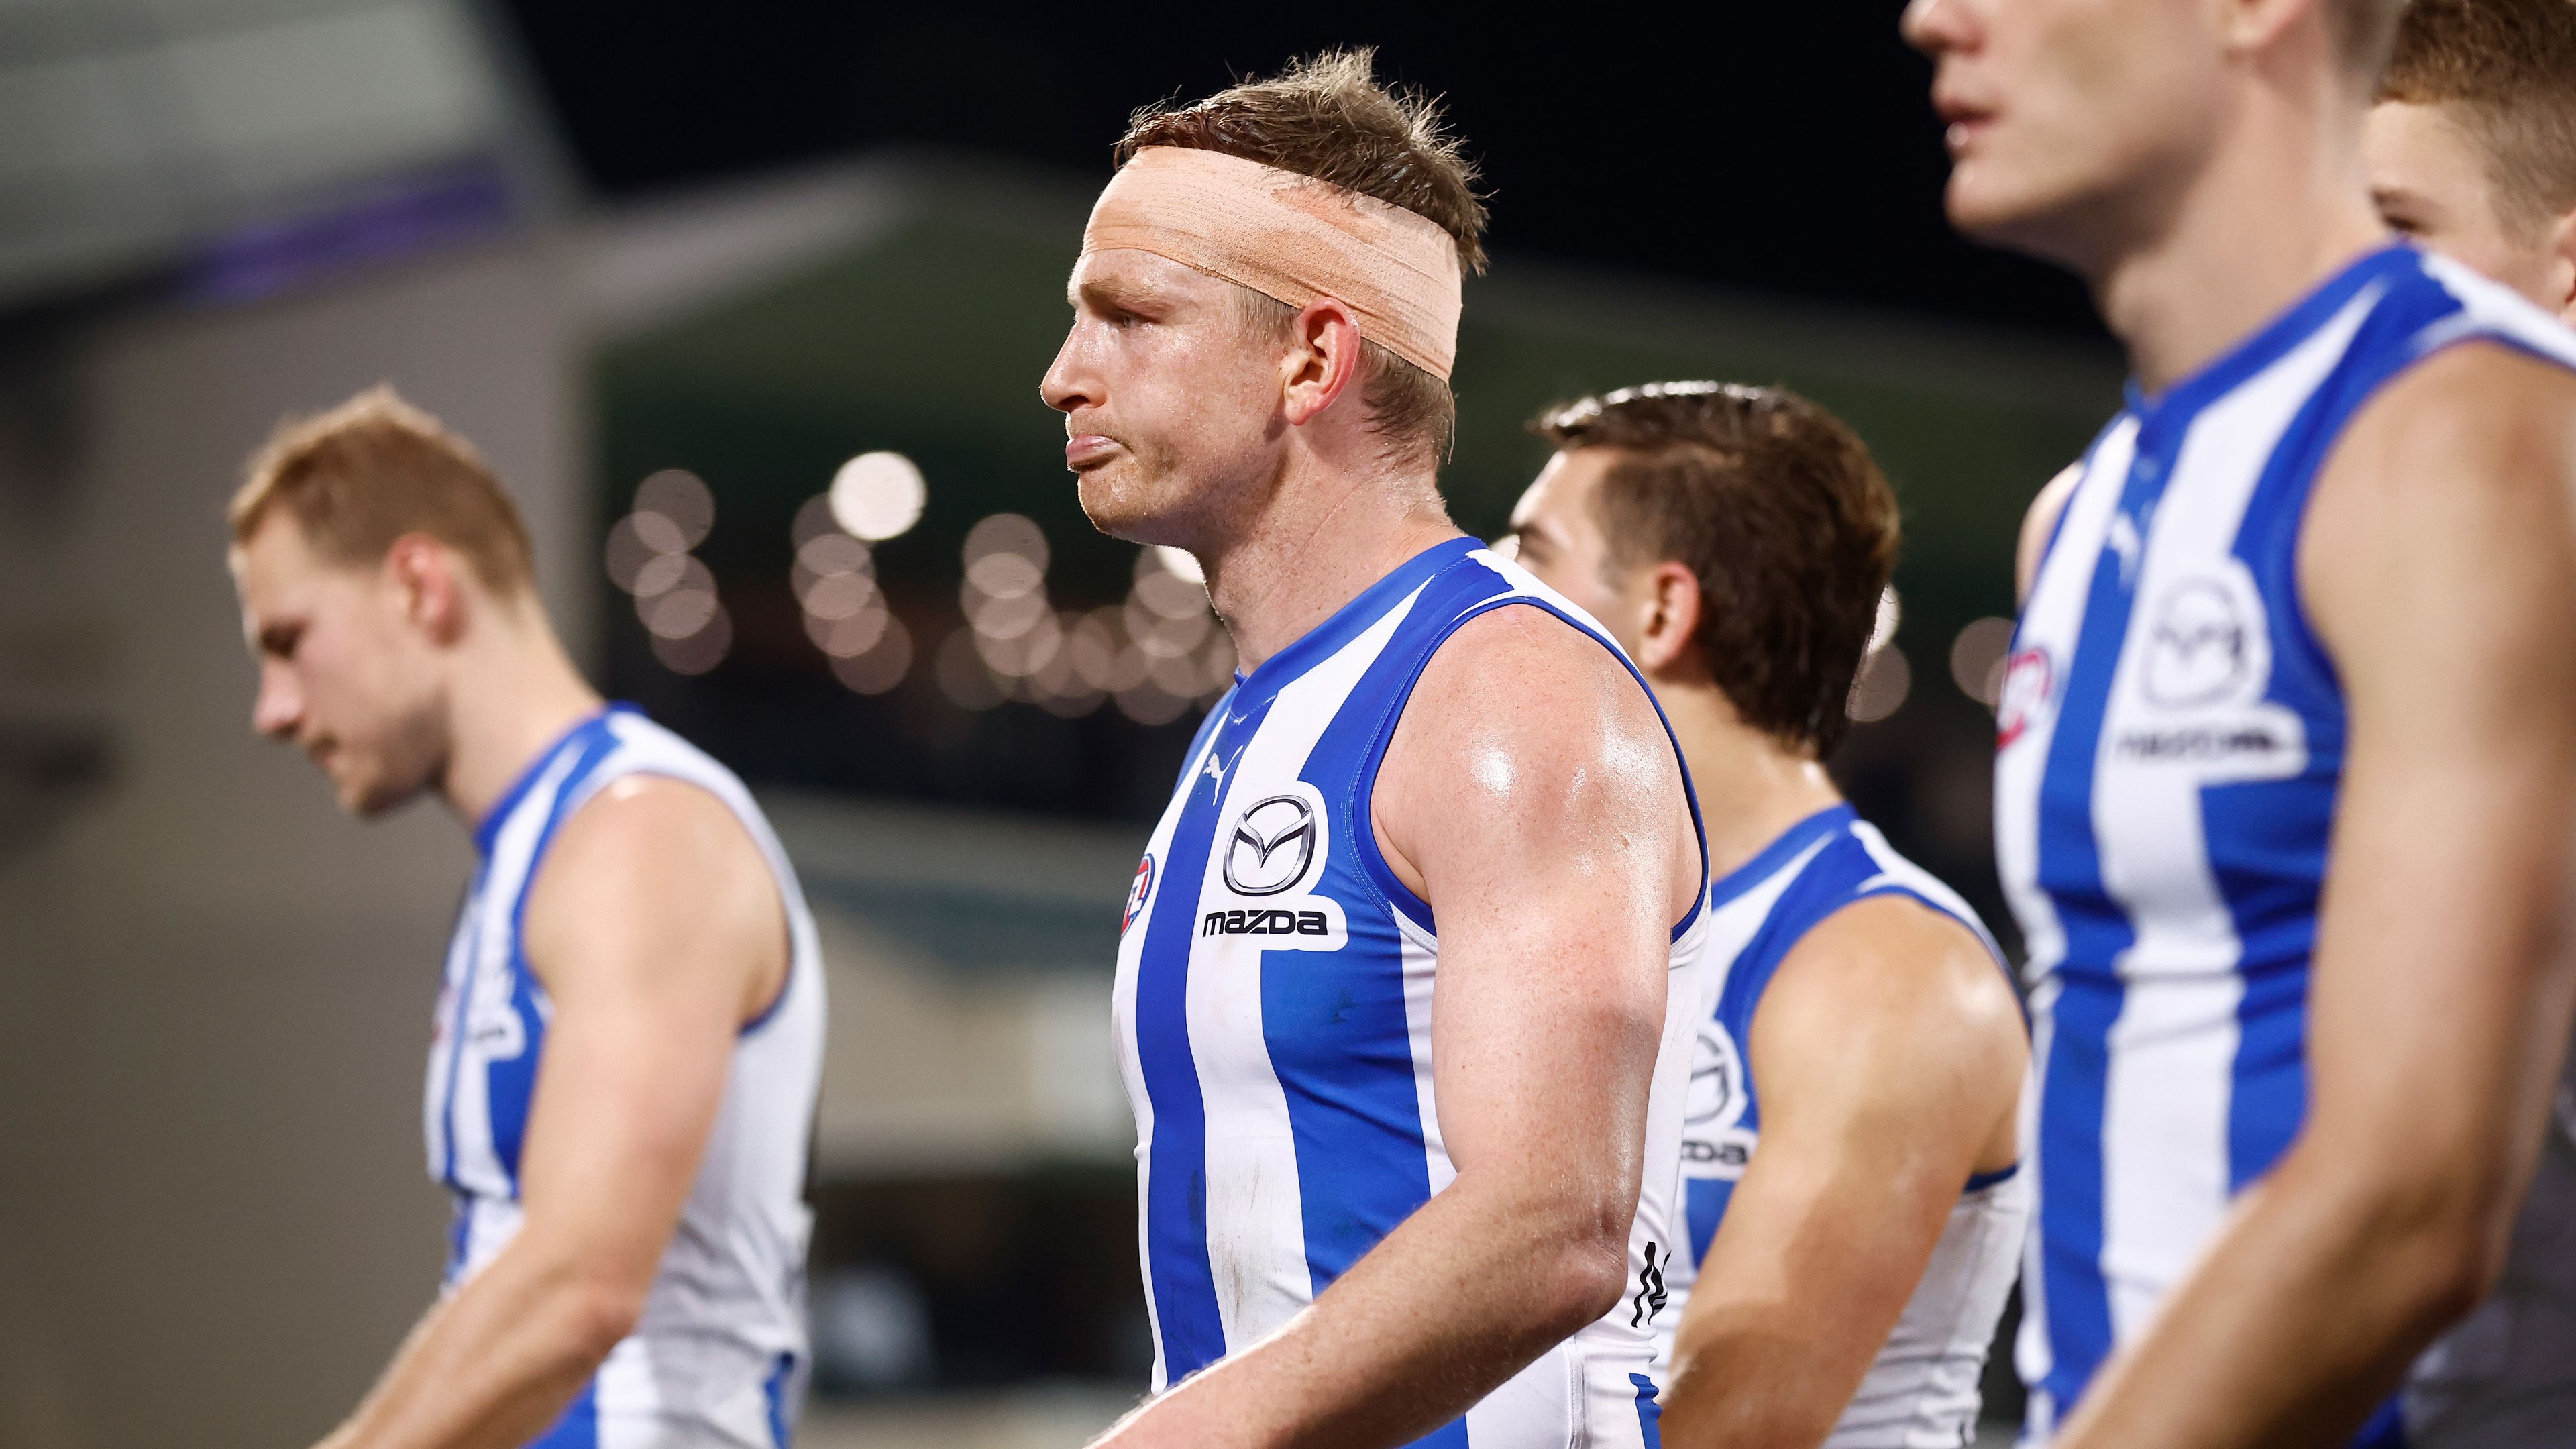 HOBART, AUSTRALIA - JUNE 11: Jack Ziebell of the Kangaroos looks dejected after a loss during the 2023 AFL Round 13 match between the North Melbourne Kangaroos and the GWS Giants at Blundstone Arena on June 11, 2023 in Hobart, Australia. (Photo by Michael Willson/AFL Photos via Getty Images)